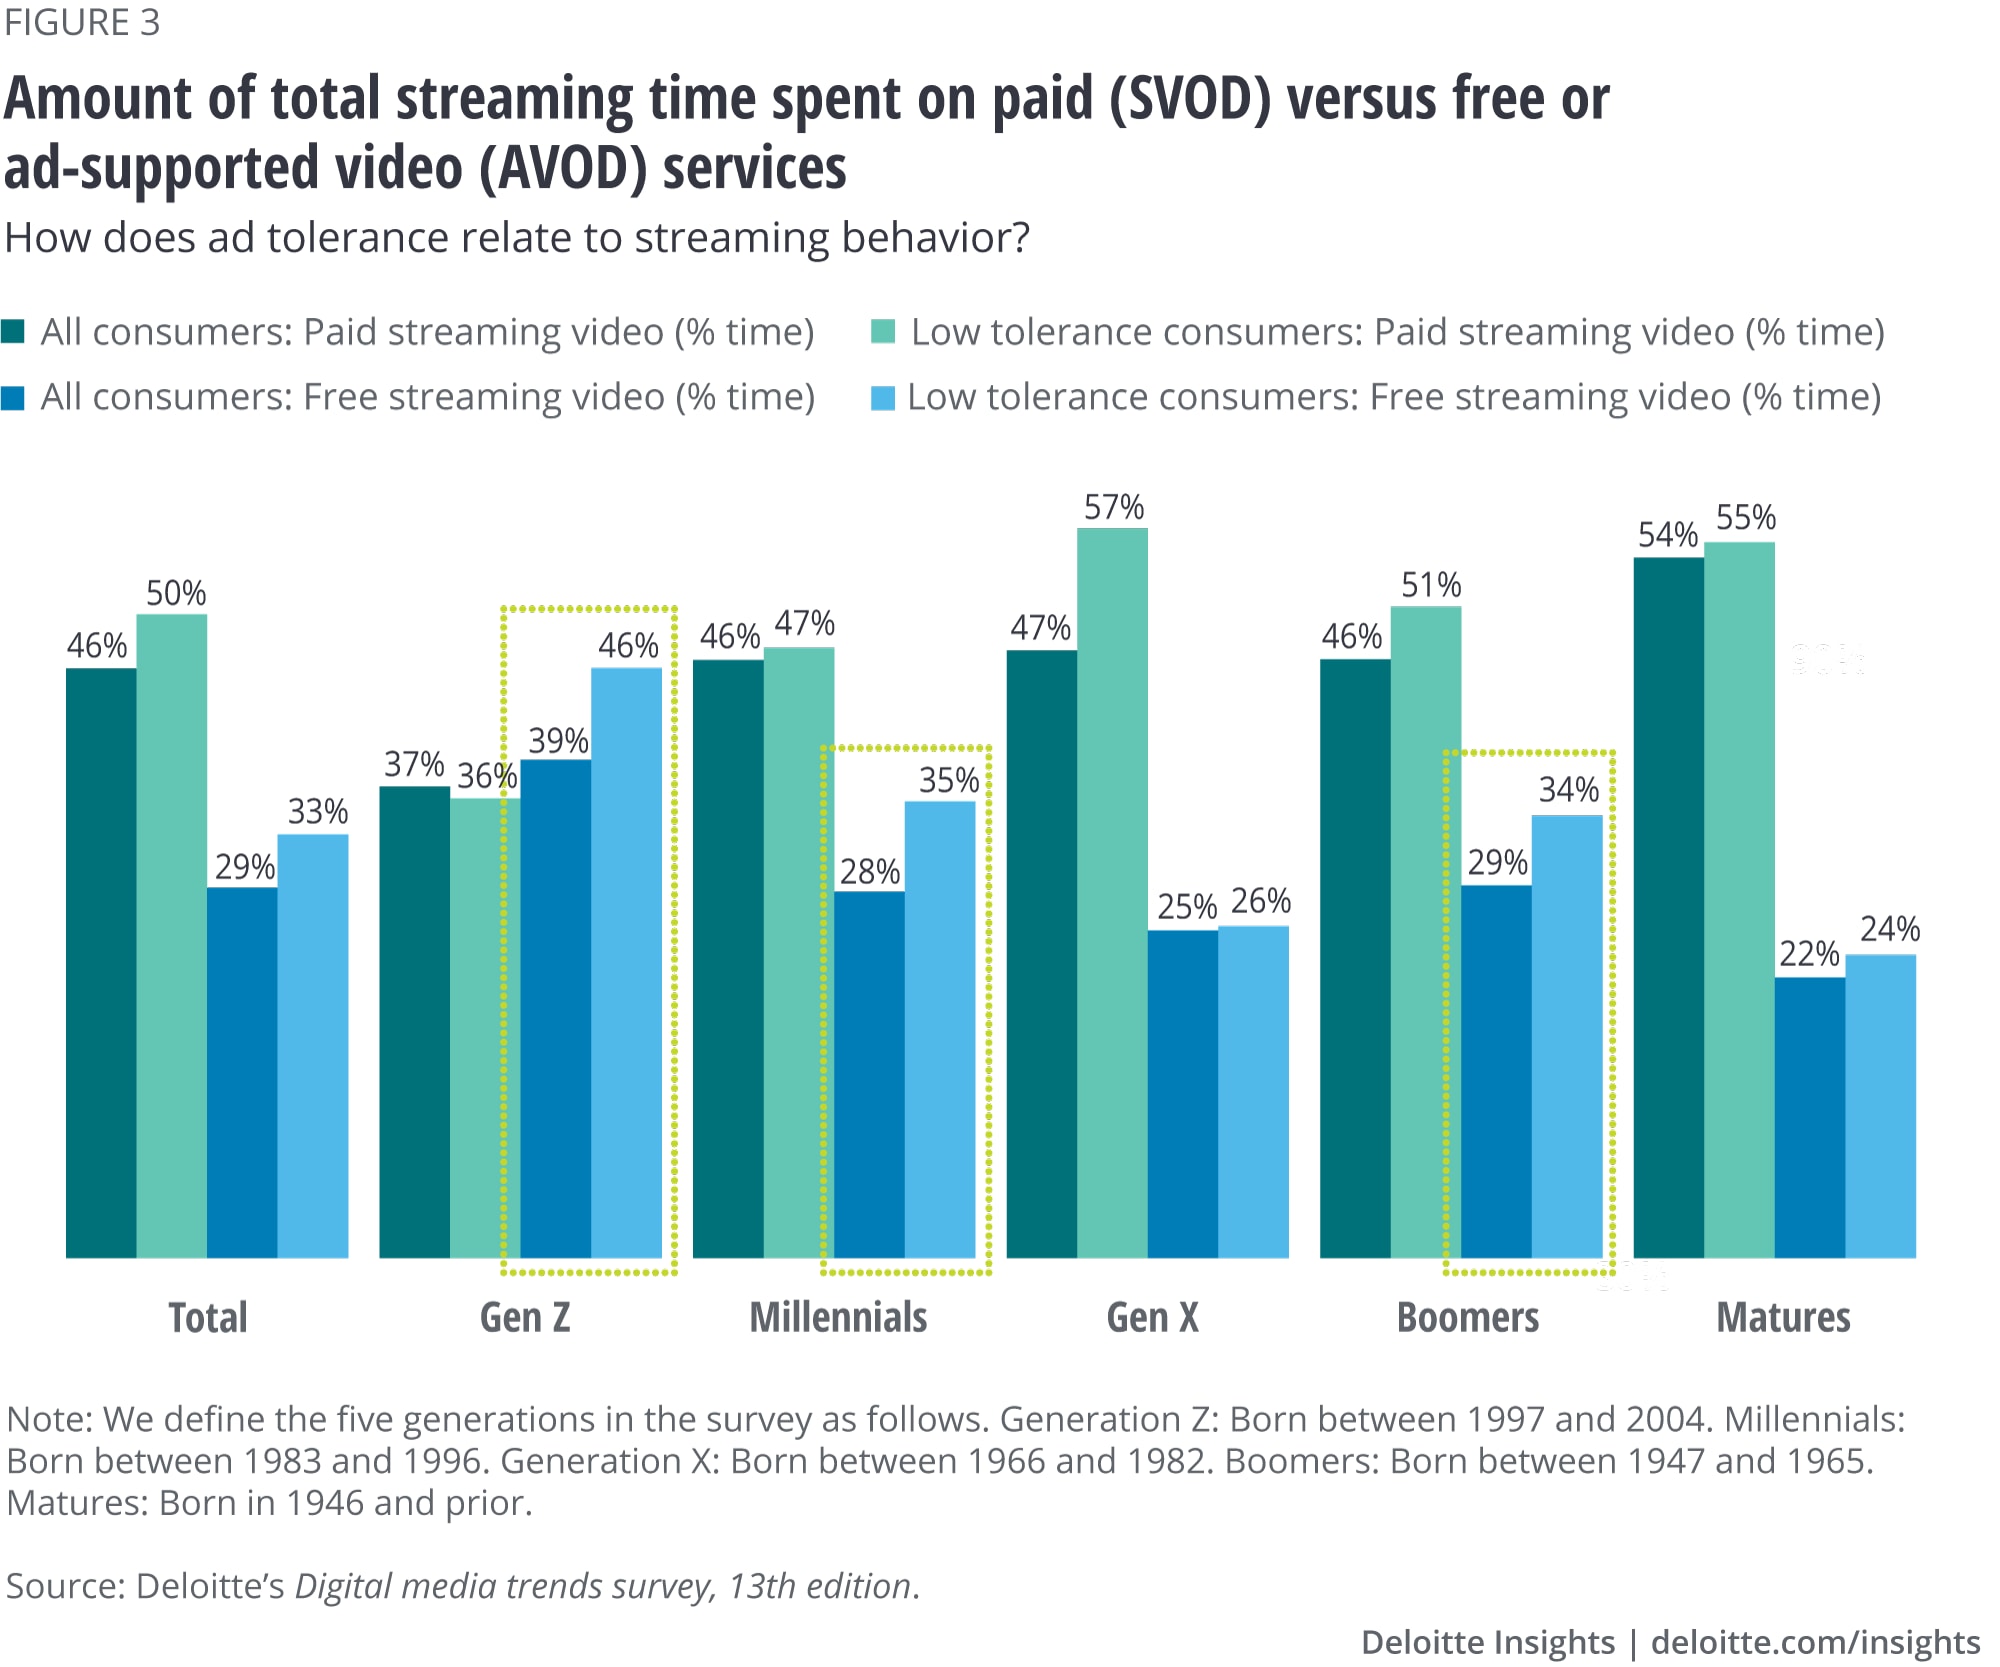 Amount of total streaming time spent on paid (SVOD) versus free or ad-supported video (AVOD) services